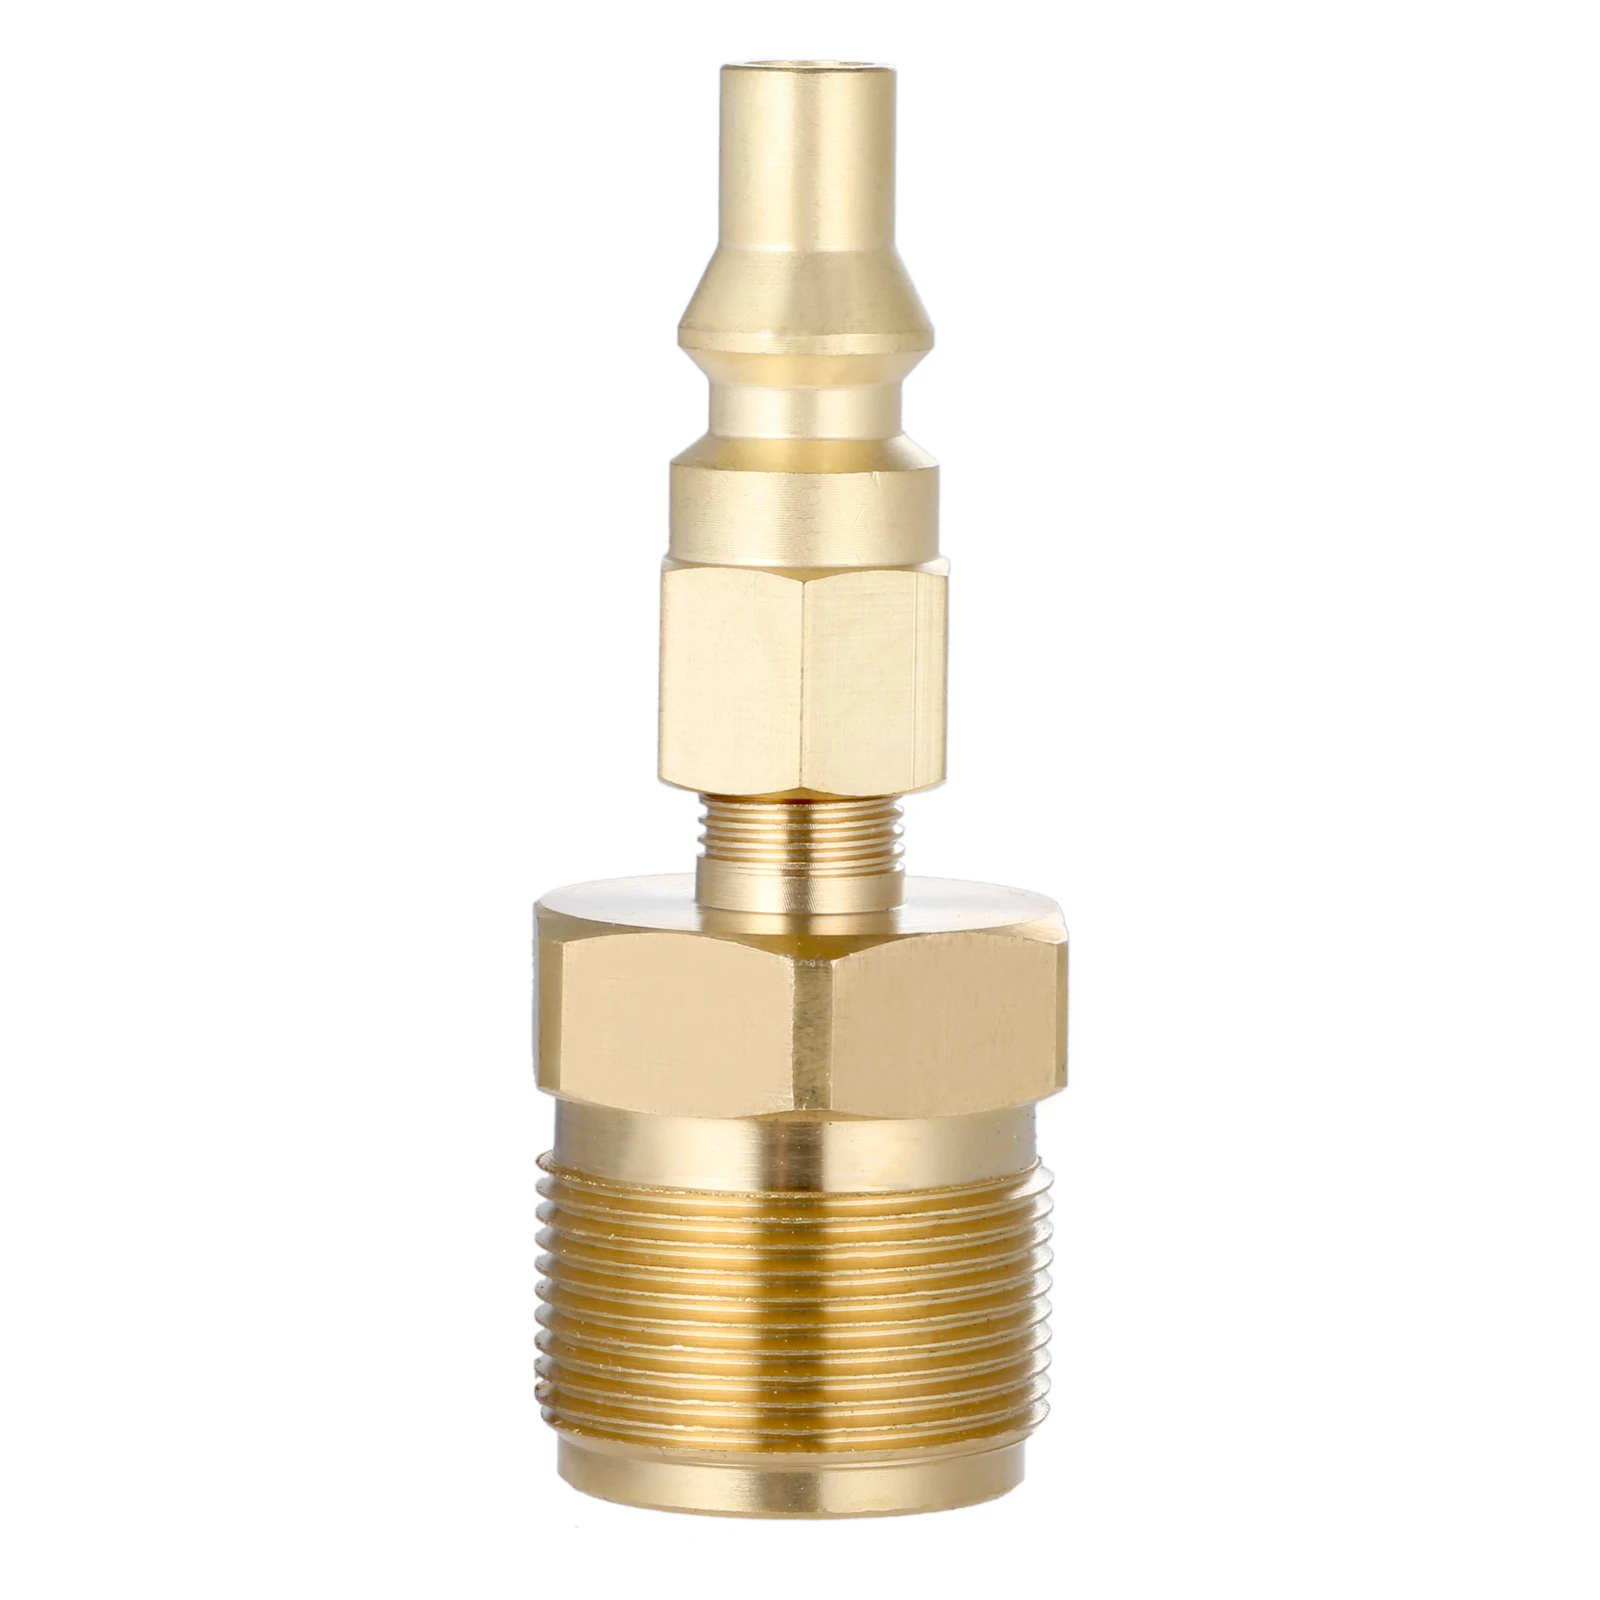 

Propane Brass Adapter Quick Connect Fitting 1/4" Disconnect Plug with 1lb Bottle Tank Thread for RV Portable BBQ Camper Grill